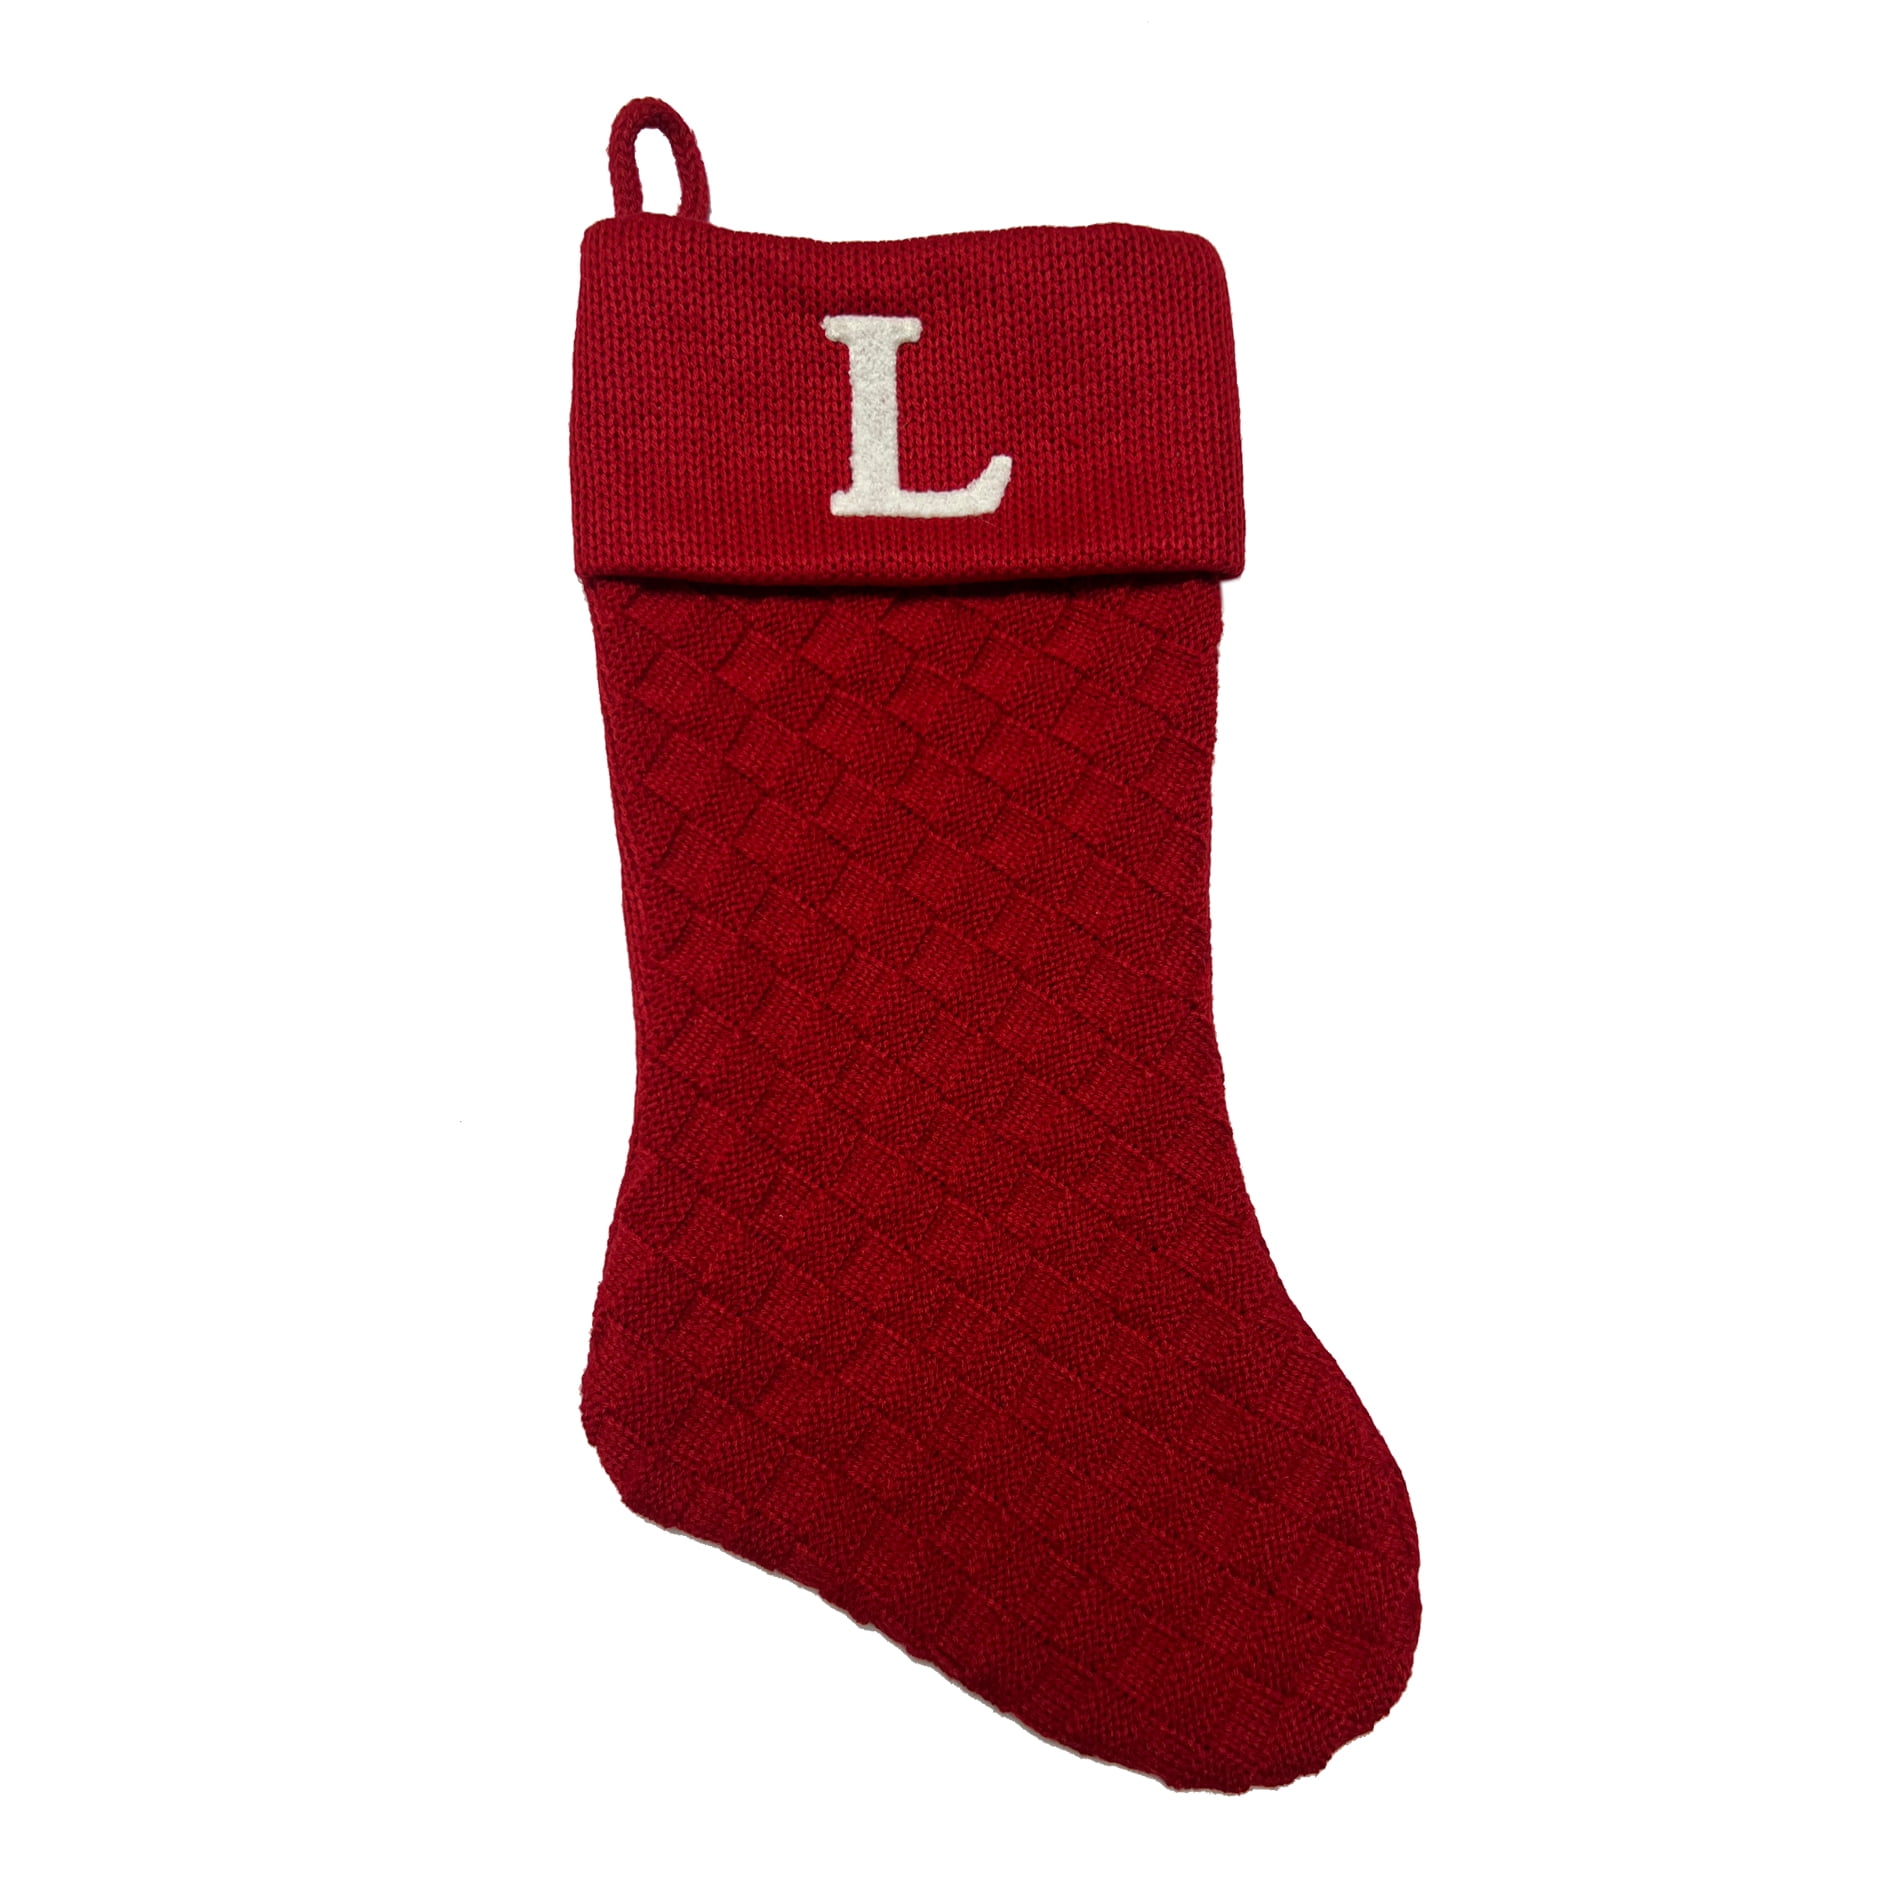 Red Knit Monogram Stocking, Letter L, 18 in, by Holiday Time - Walmart.com